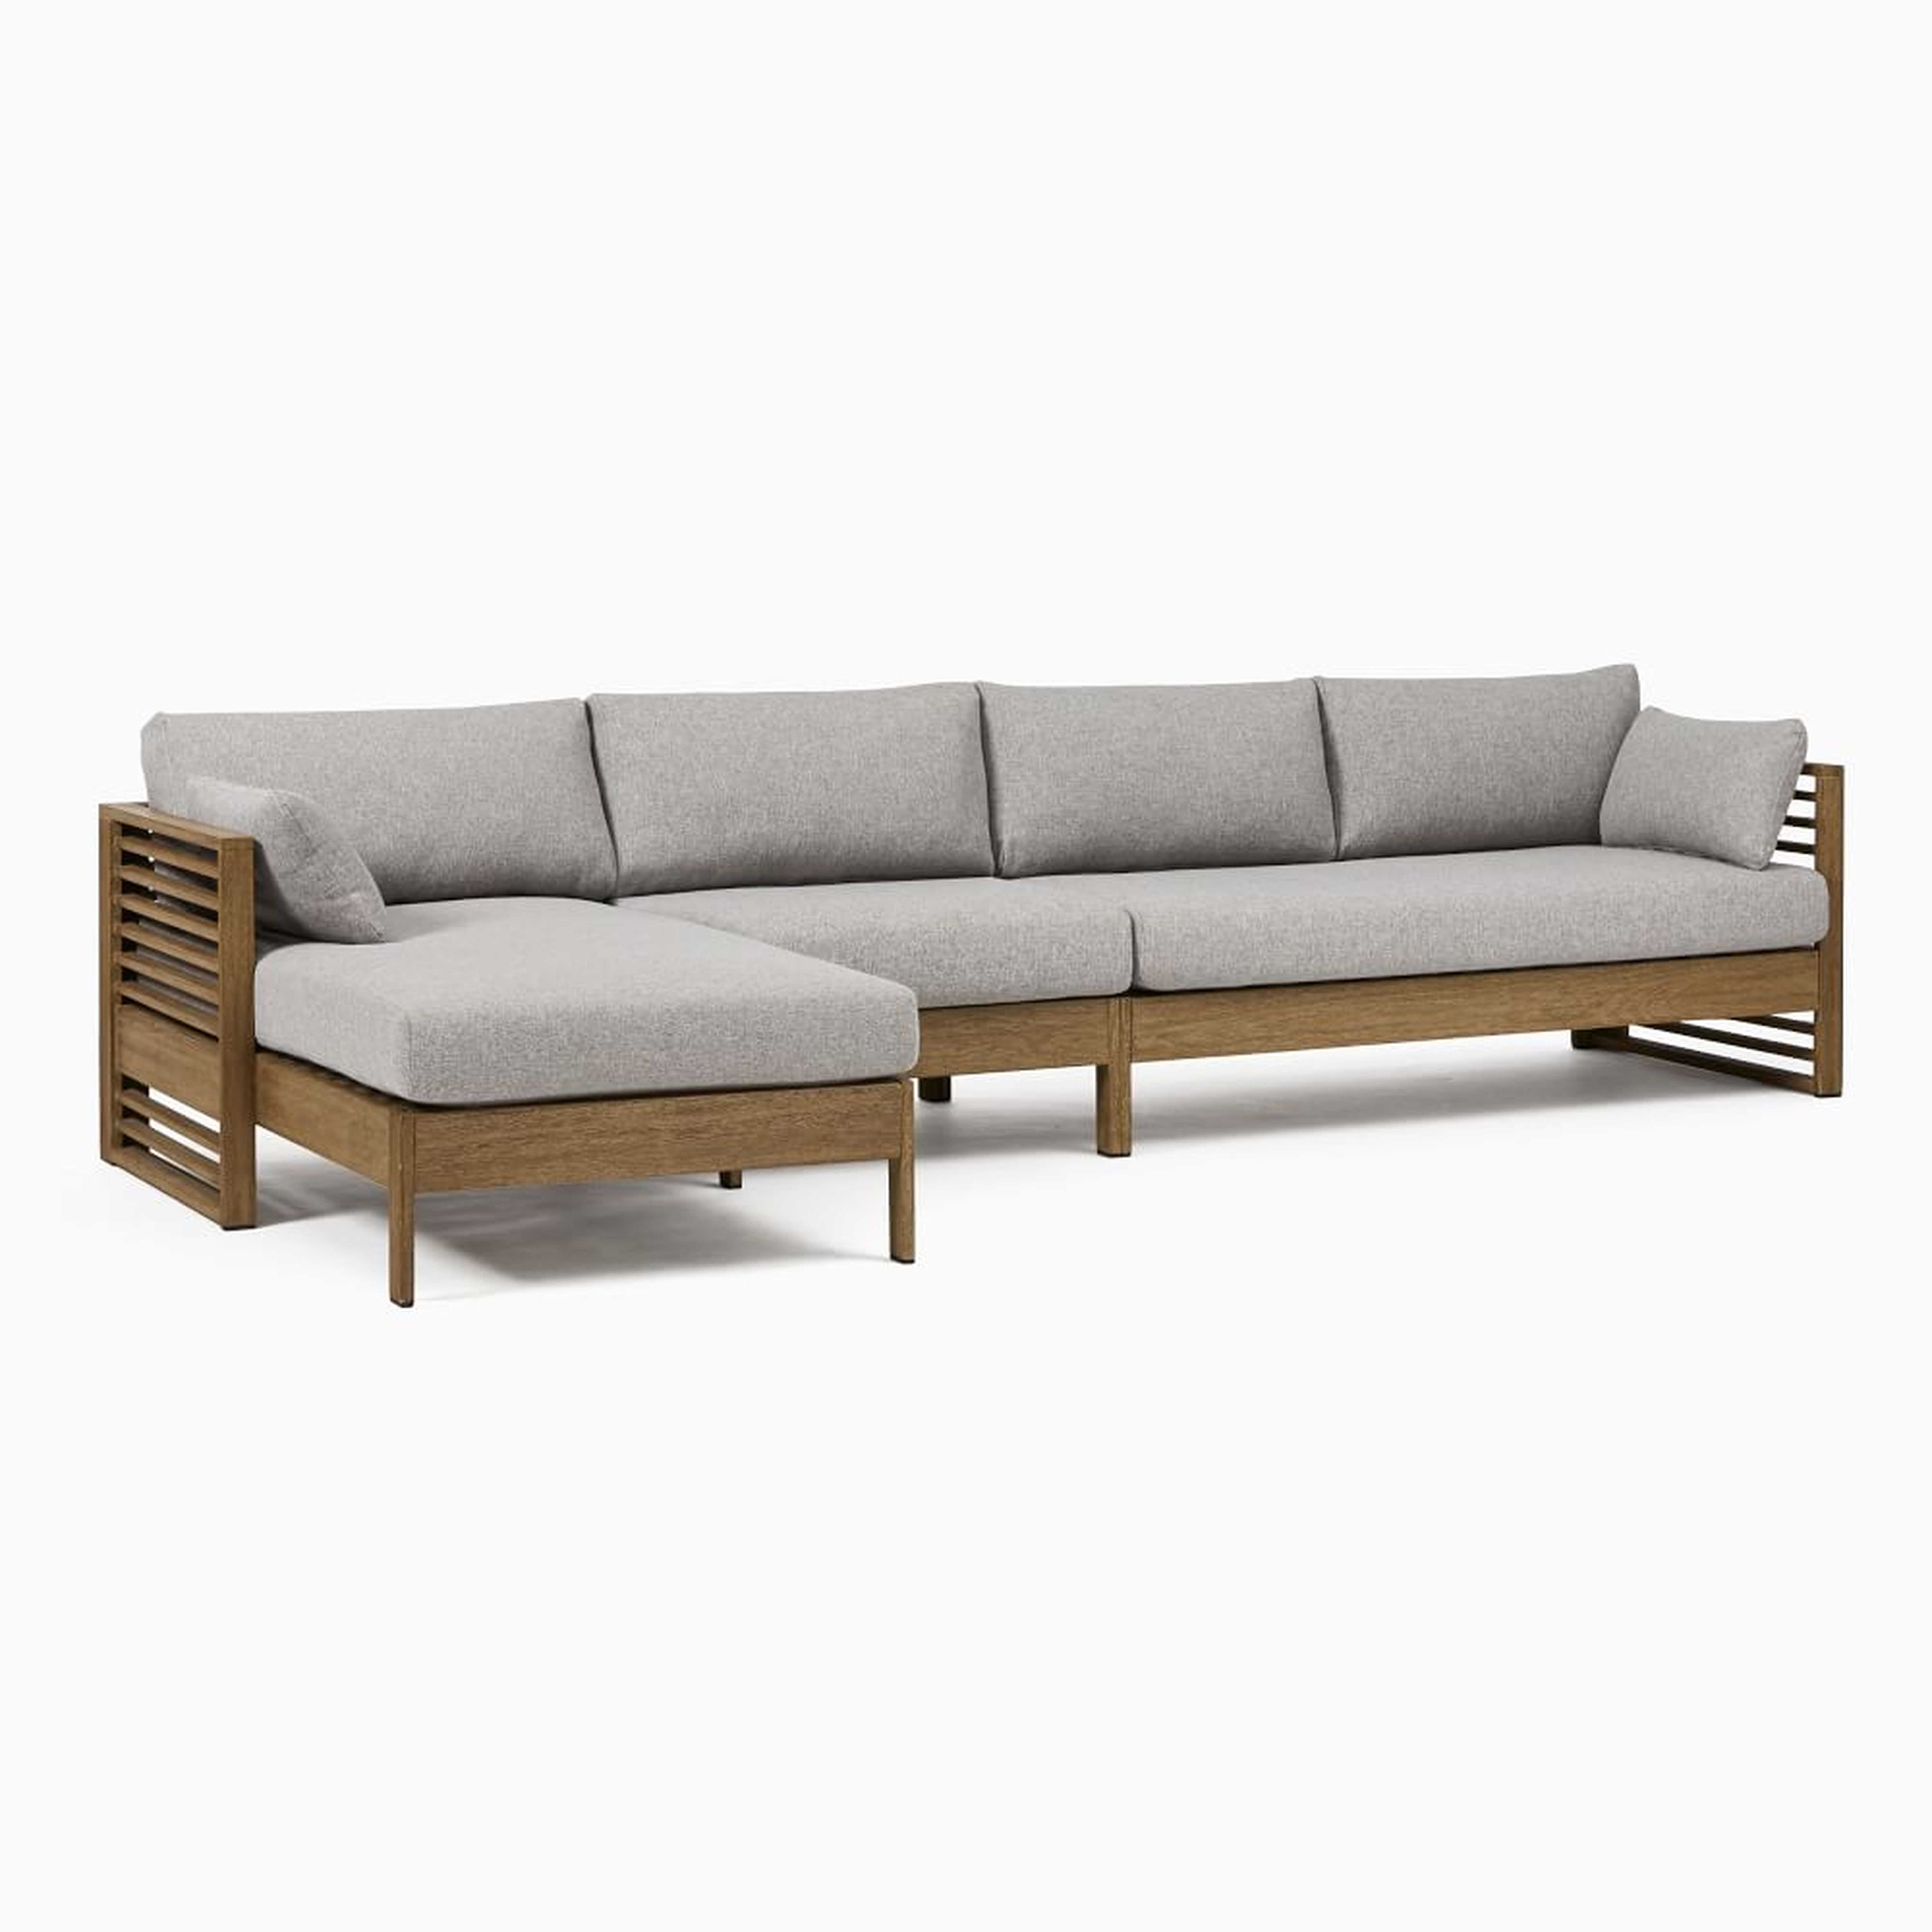 Santa Fe Slatted Outdoor 124 in 3-Piece Chaise Sectional, Driftwood - West Elm